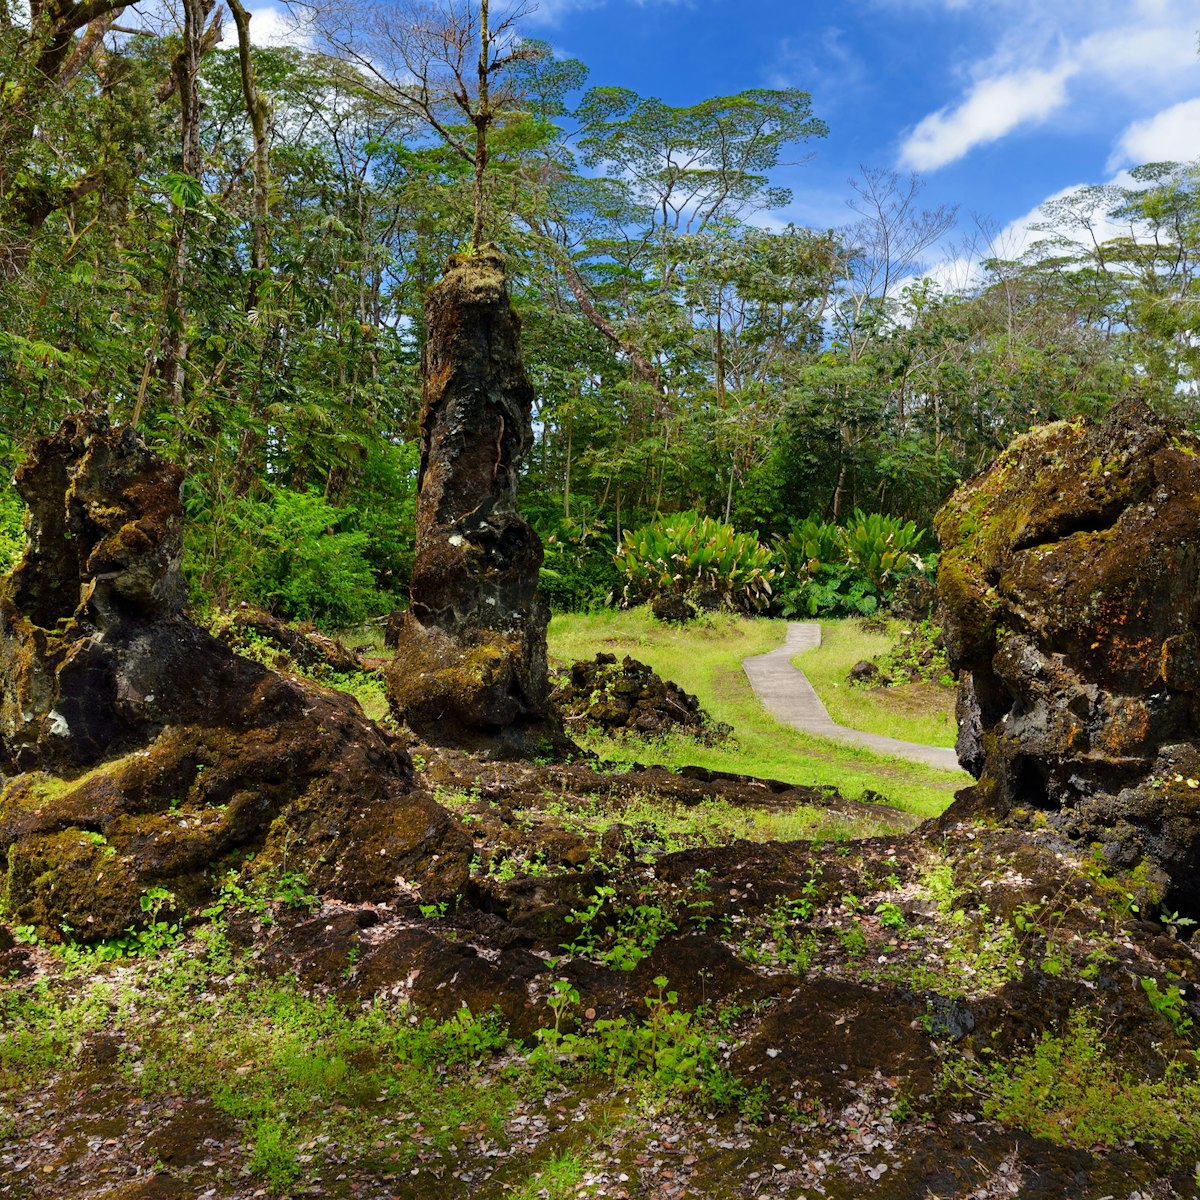 Lava molds of the tree trunks that were formed when a lava flow swept through a forested area in Lava Tree State Monument on the Big Island of Hawaii, USA
1034528940
state